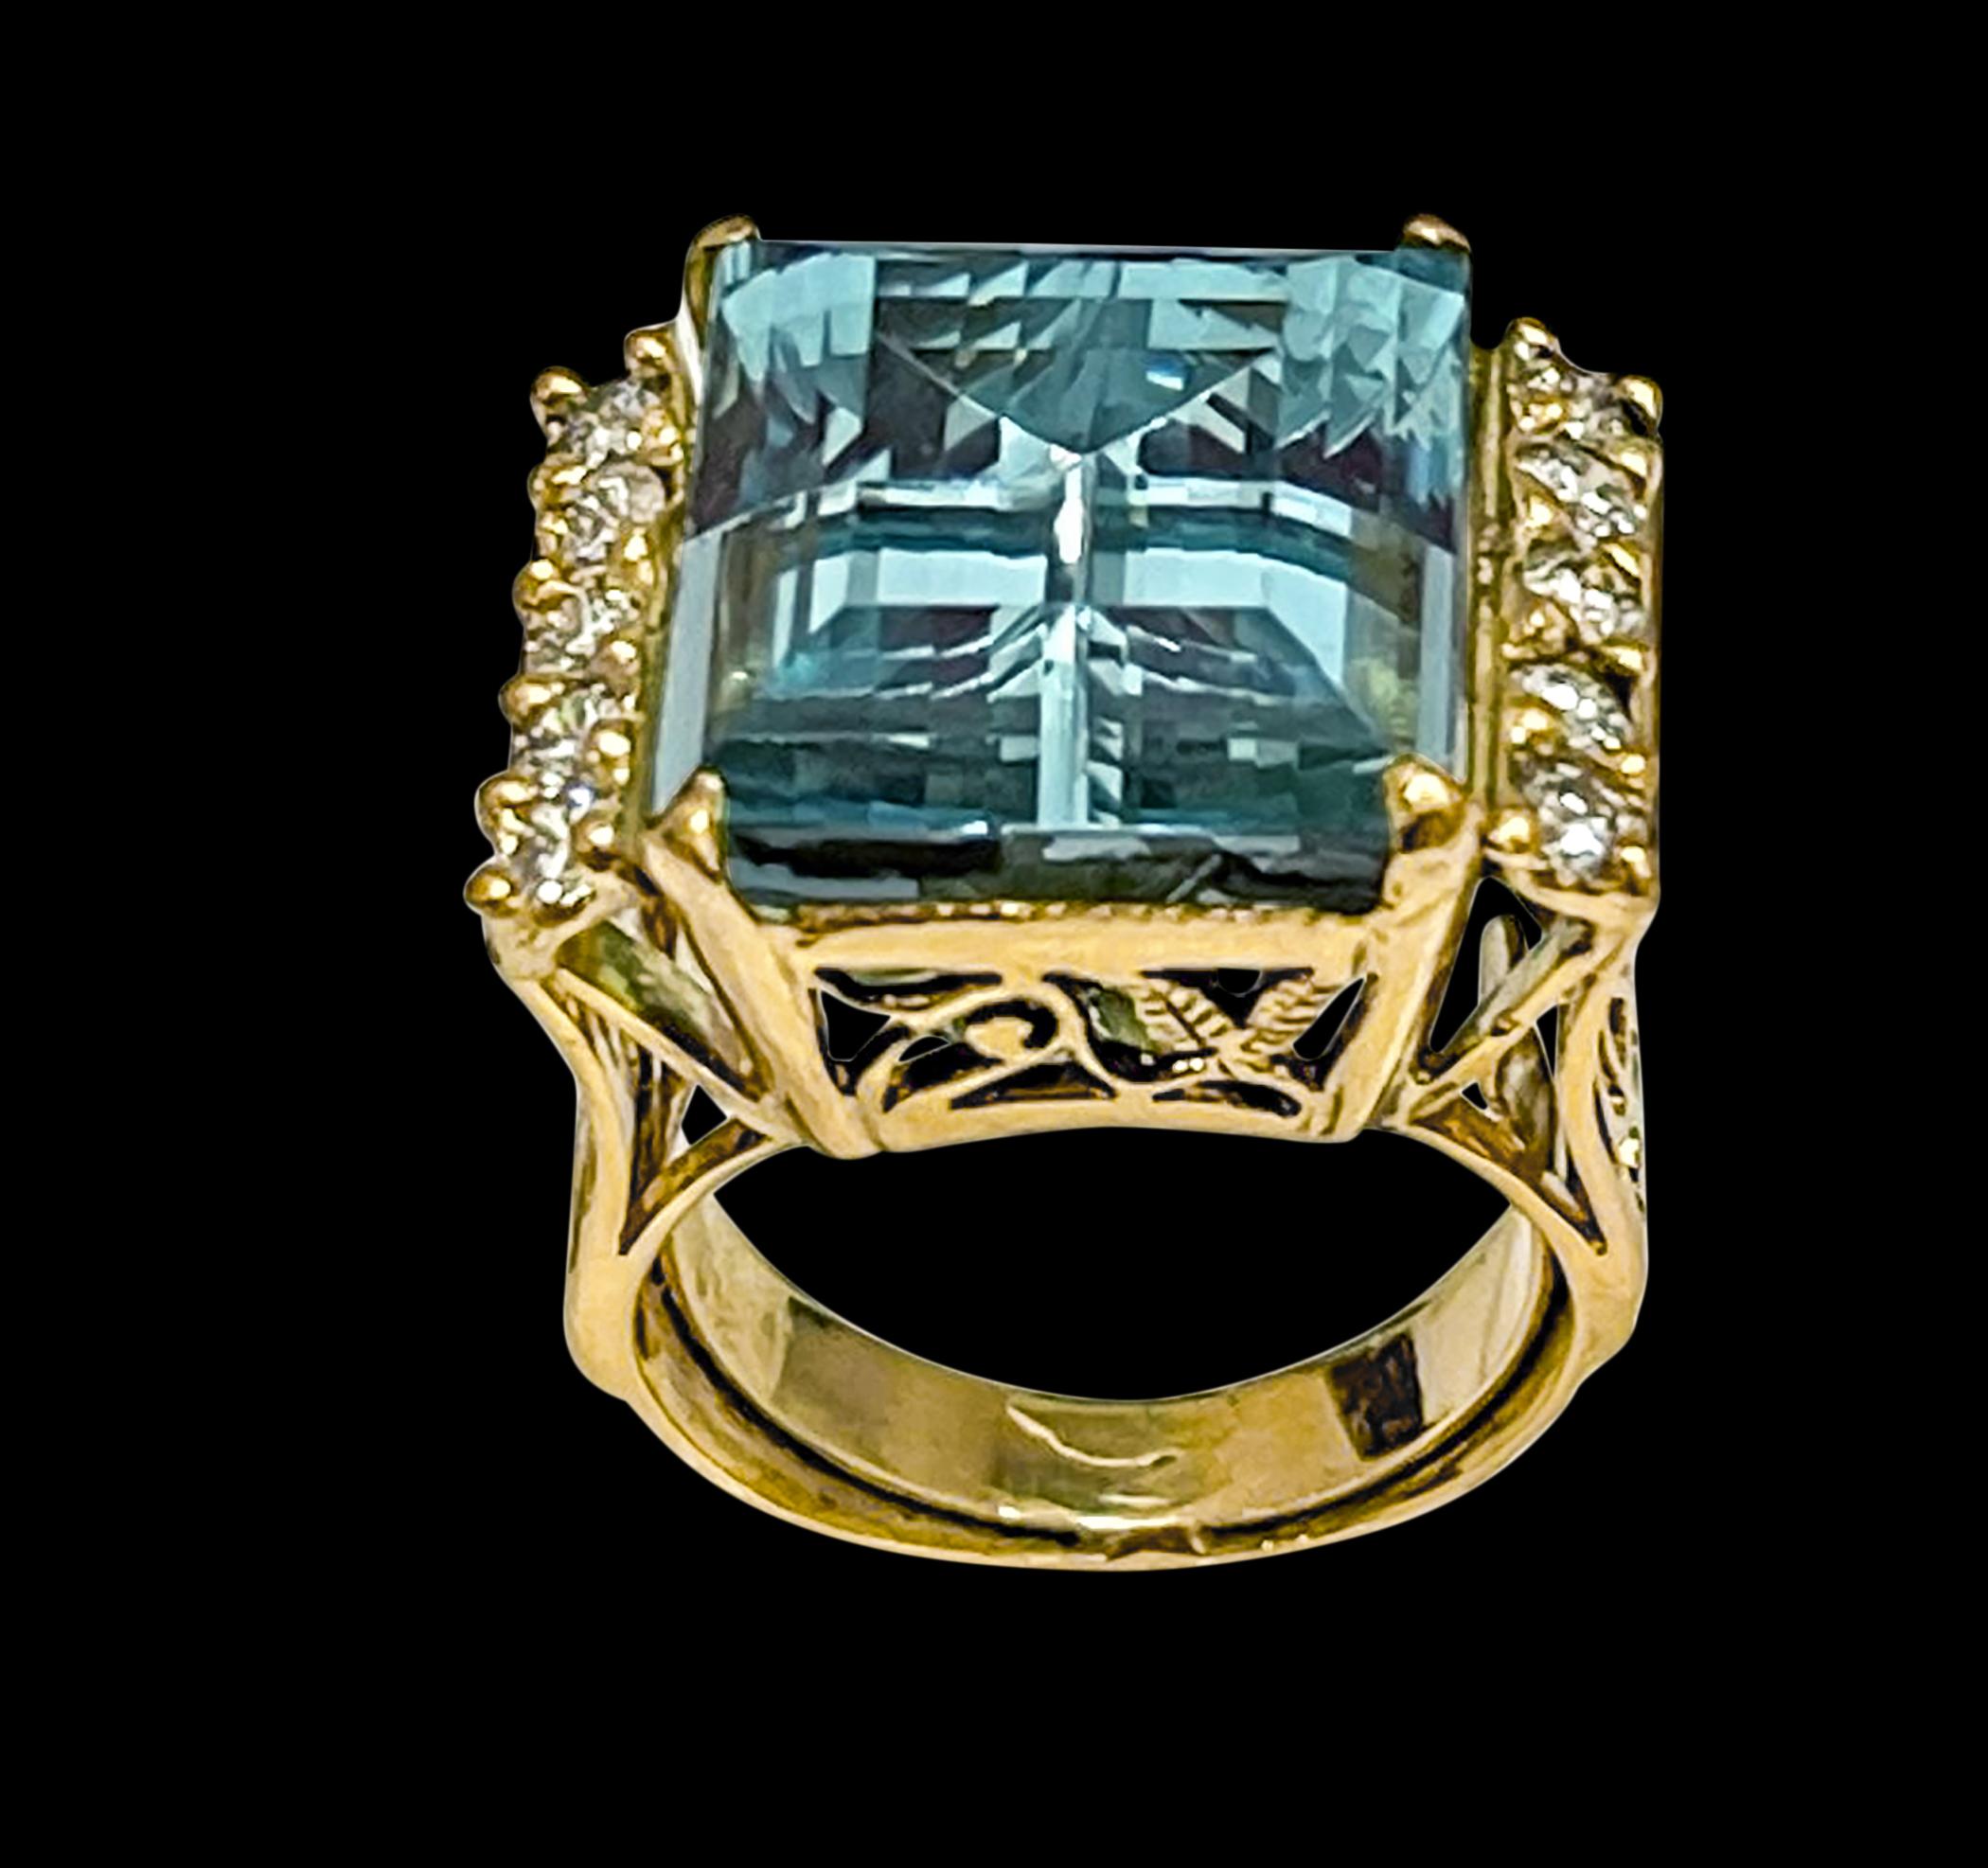 19 Carat Natural Aquamarine and Diamond Cocktail Earring, 14 Karat Yellow Gold Estate , Size 6
Natural Aqua Emerald cut stone  Measurements 16X14MM
Very desirable color and quality.
Gold 11.6 Grams
Brilliant cut Round diamonds , one row on each side